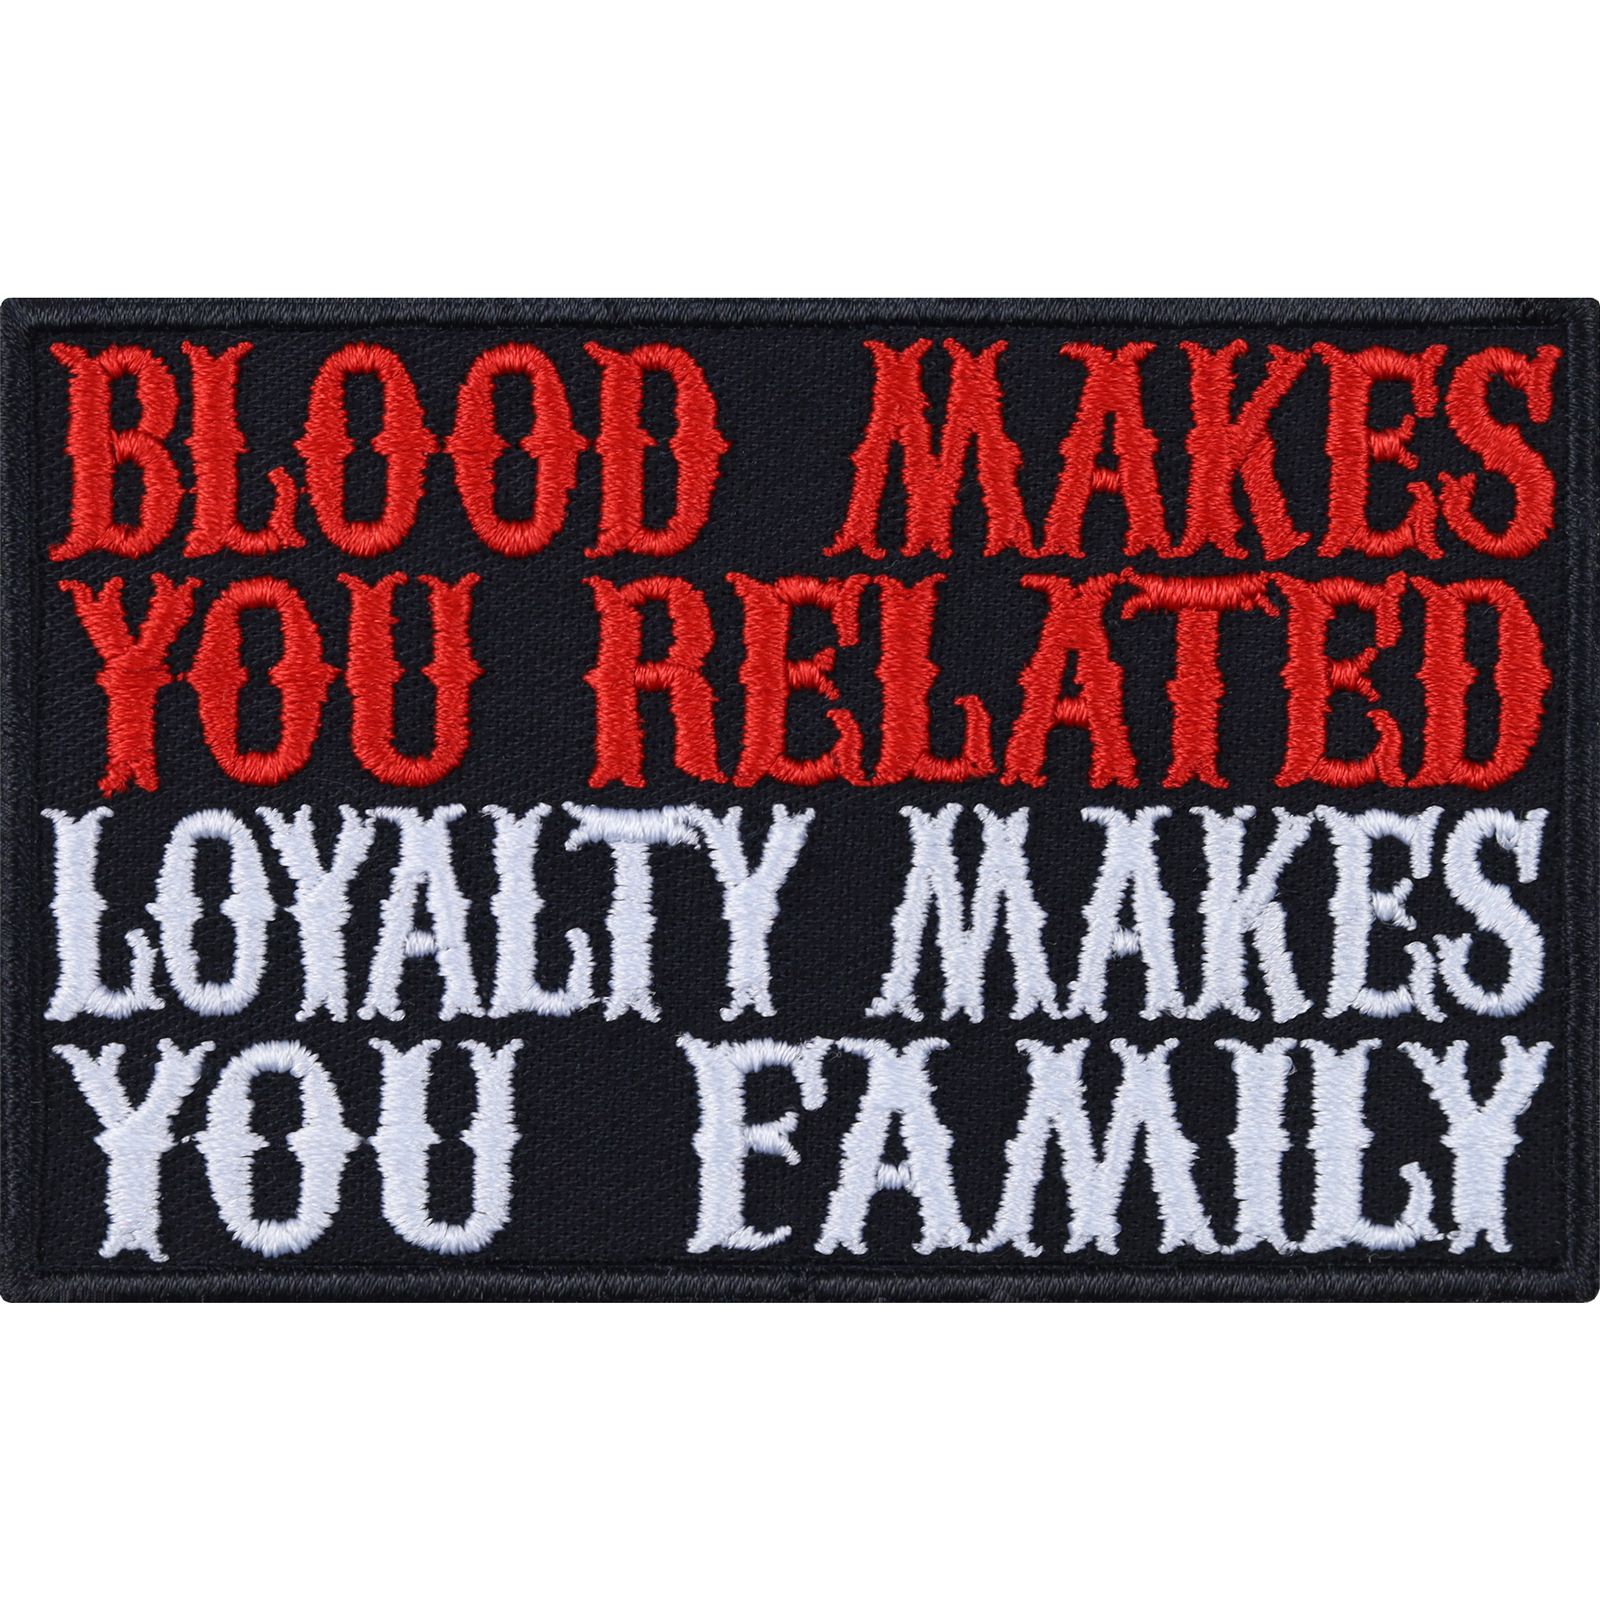 Blood makes you related - loyalty makes you family - Patch